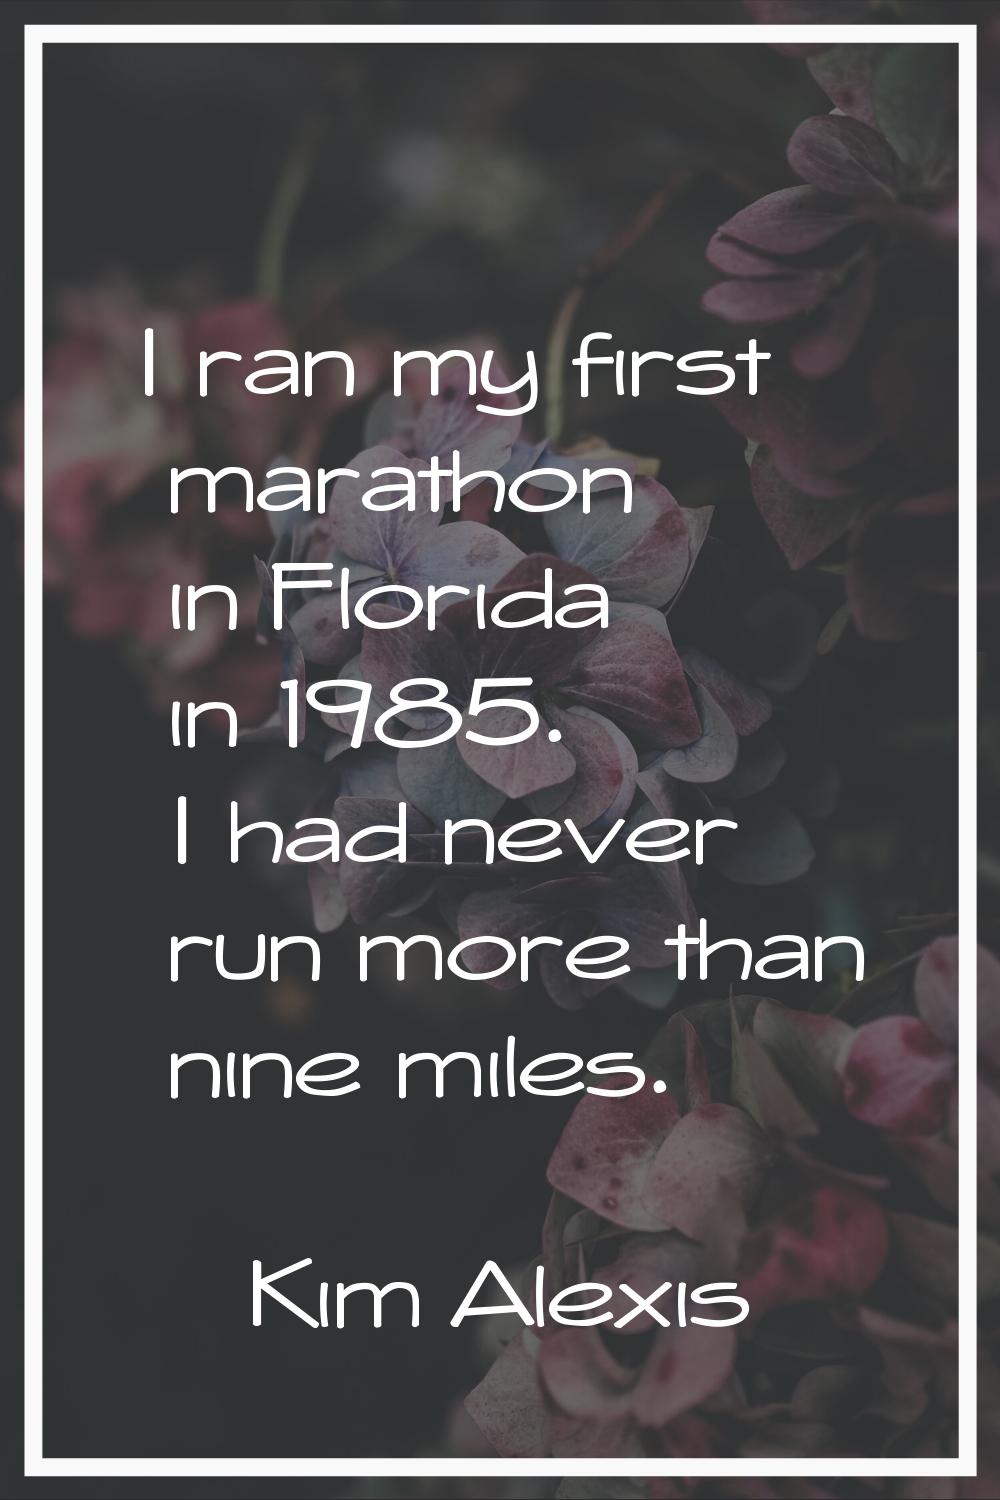 I ran my first marathon in Florida in 1985. I had never run more than nine miles.